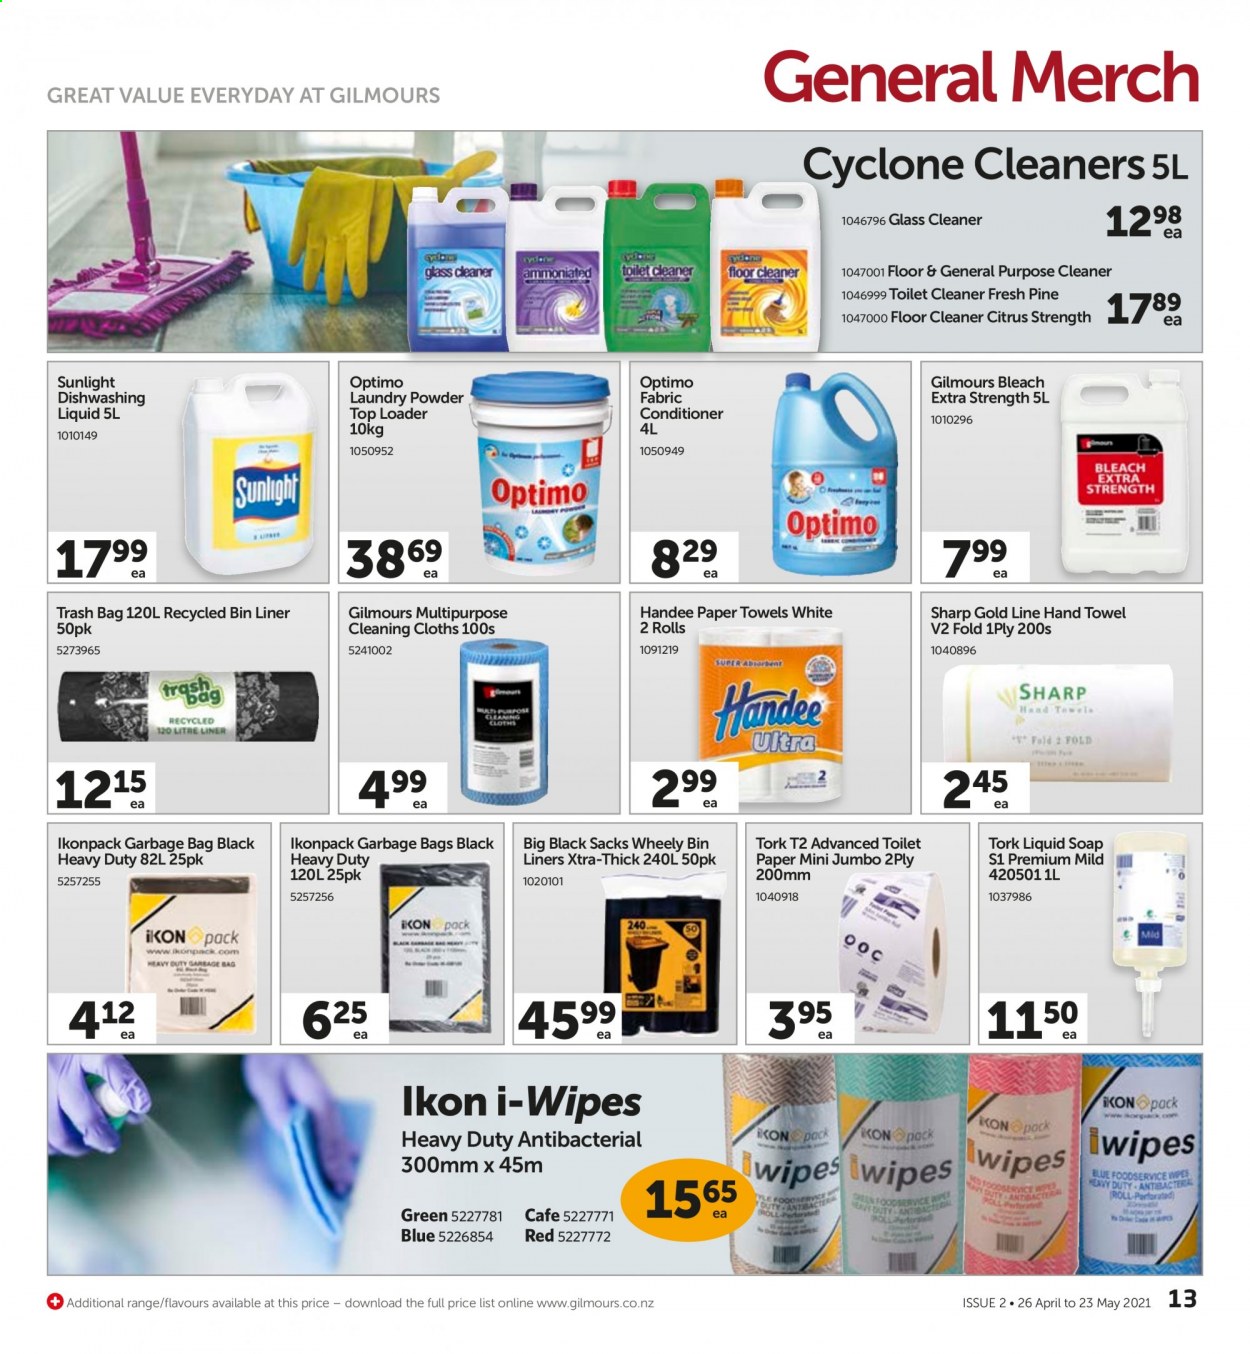 thumbnail - Gilmours mailer - 26.04.2021 - 23.05.2021 - Sales products - wipes, toilet paper, Handee, kitchen towels, paper towels, cleaner, bleach, floor cleaner, toilet cleaner, glass cleaner, laundry powder, Sunlight, XTRA, dishwashing liquid. Page 13.